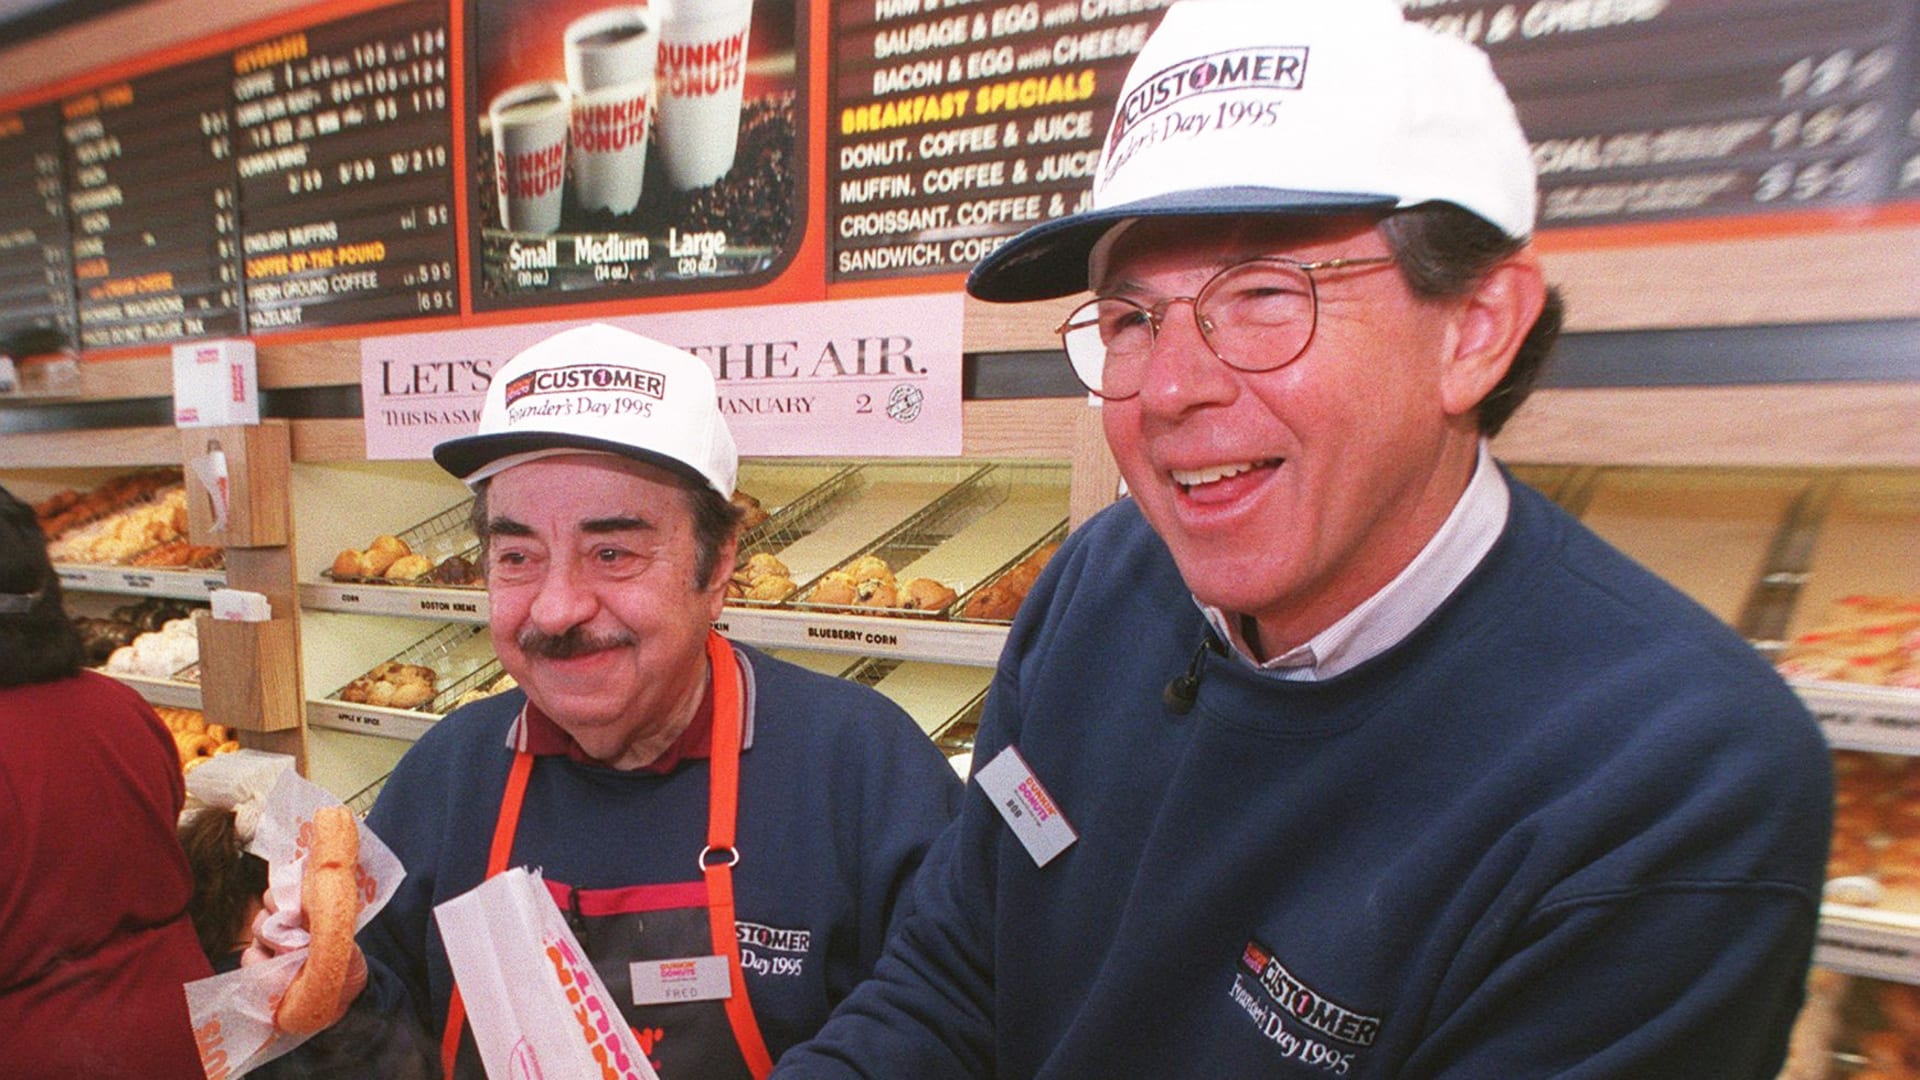 Dunkin' Donuts CEO Bob Rosenberg pours a customer coffee as actor Michael Vale, who plays "Fred the Baker" in TV commercials, gets ready with a donut at the original Dunkin' Donuts location in Quincy, Massachusetts on January 31, 1995.